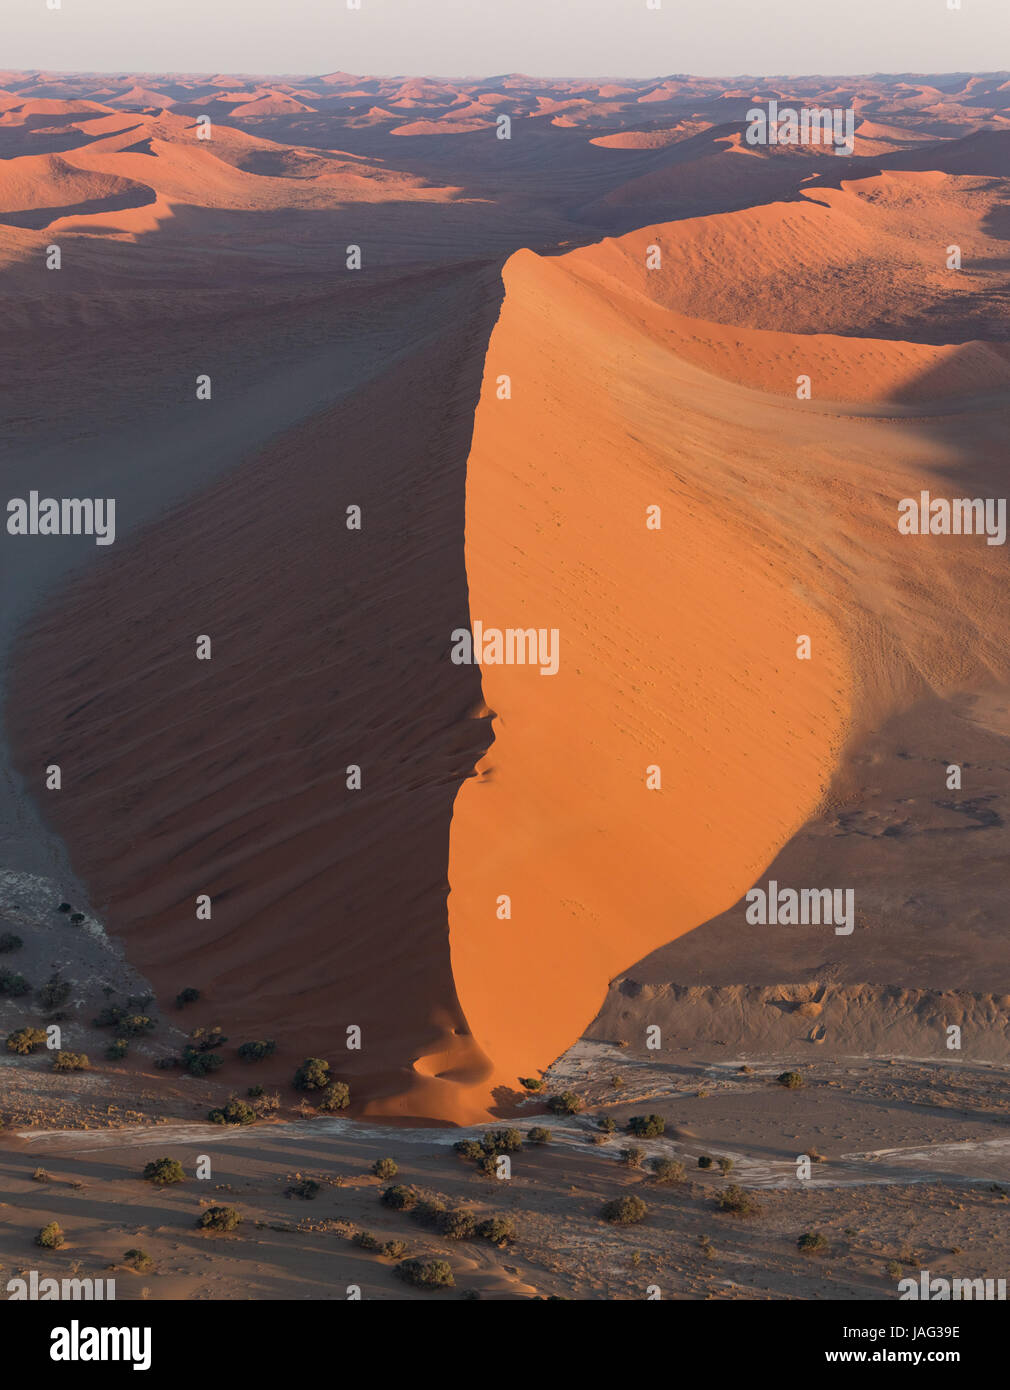 View from a helicopter of one of the large red sand dunes of Sossusvlei in Namibia Stock Photo